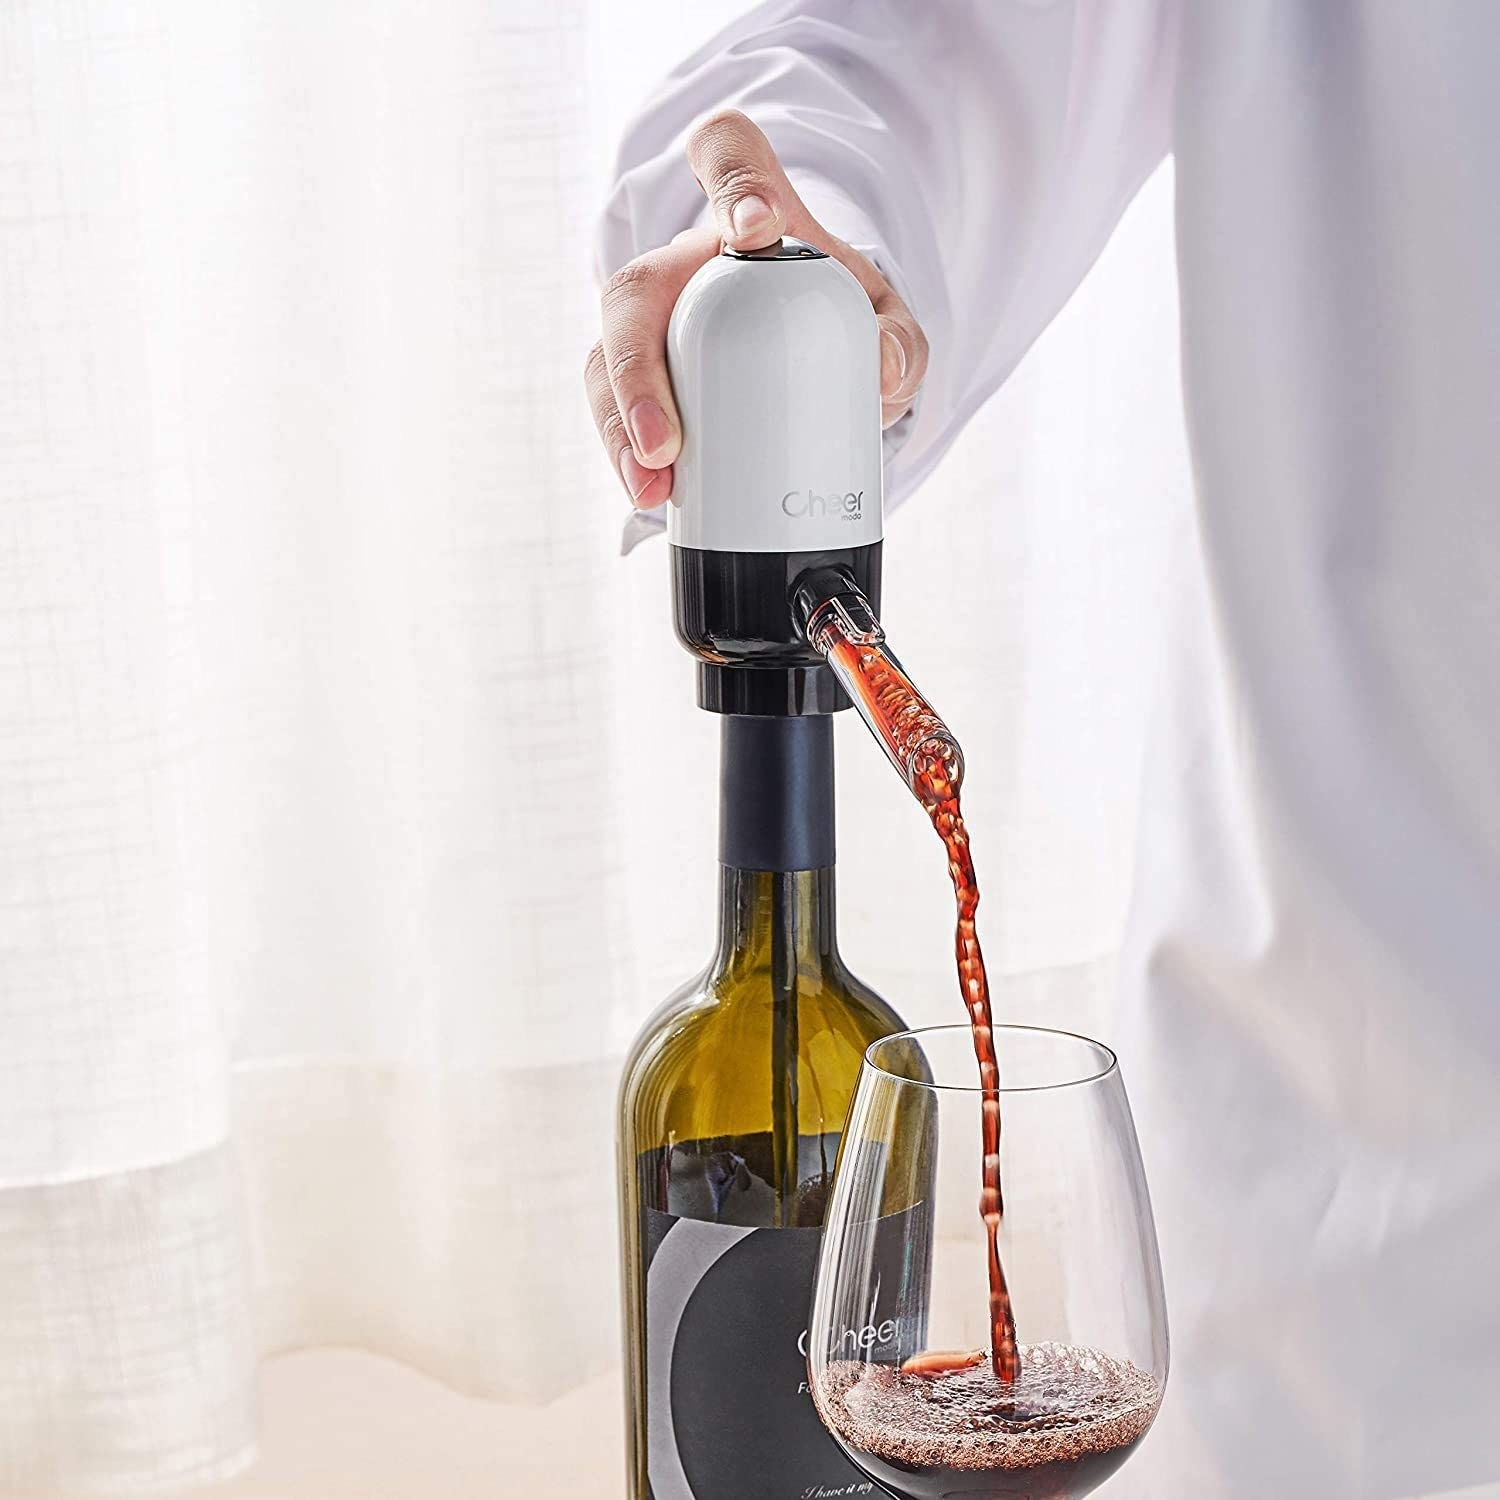 A person pouring wine into a glass from the aerator spout